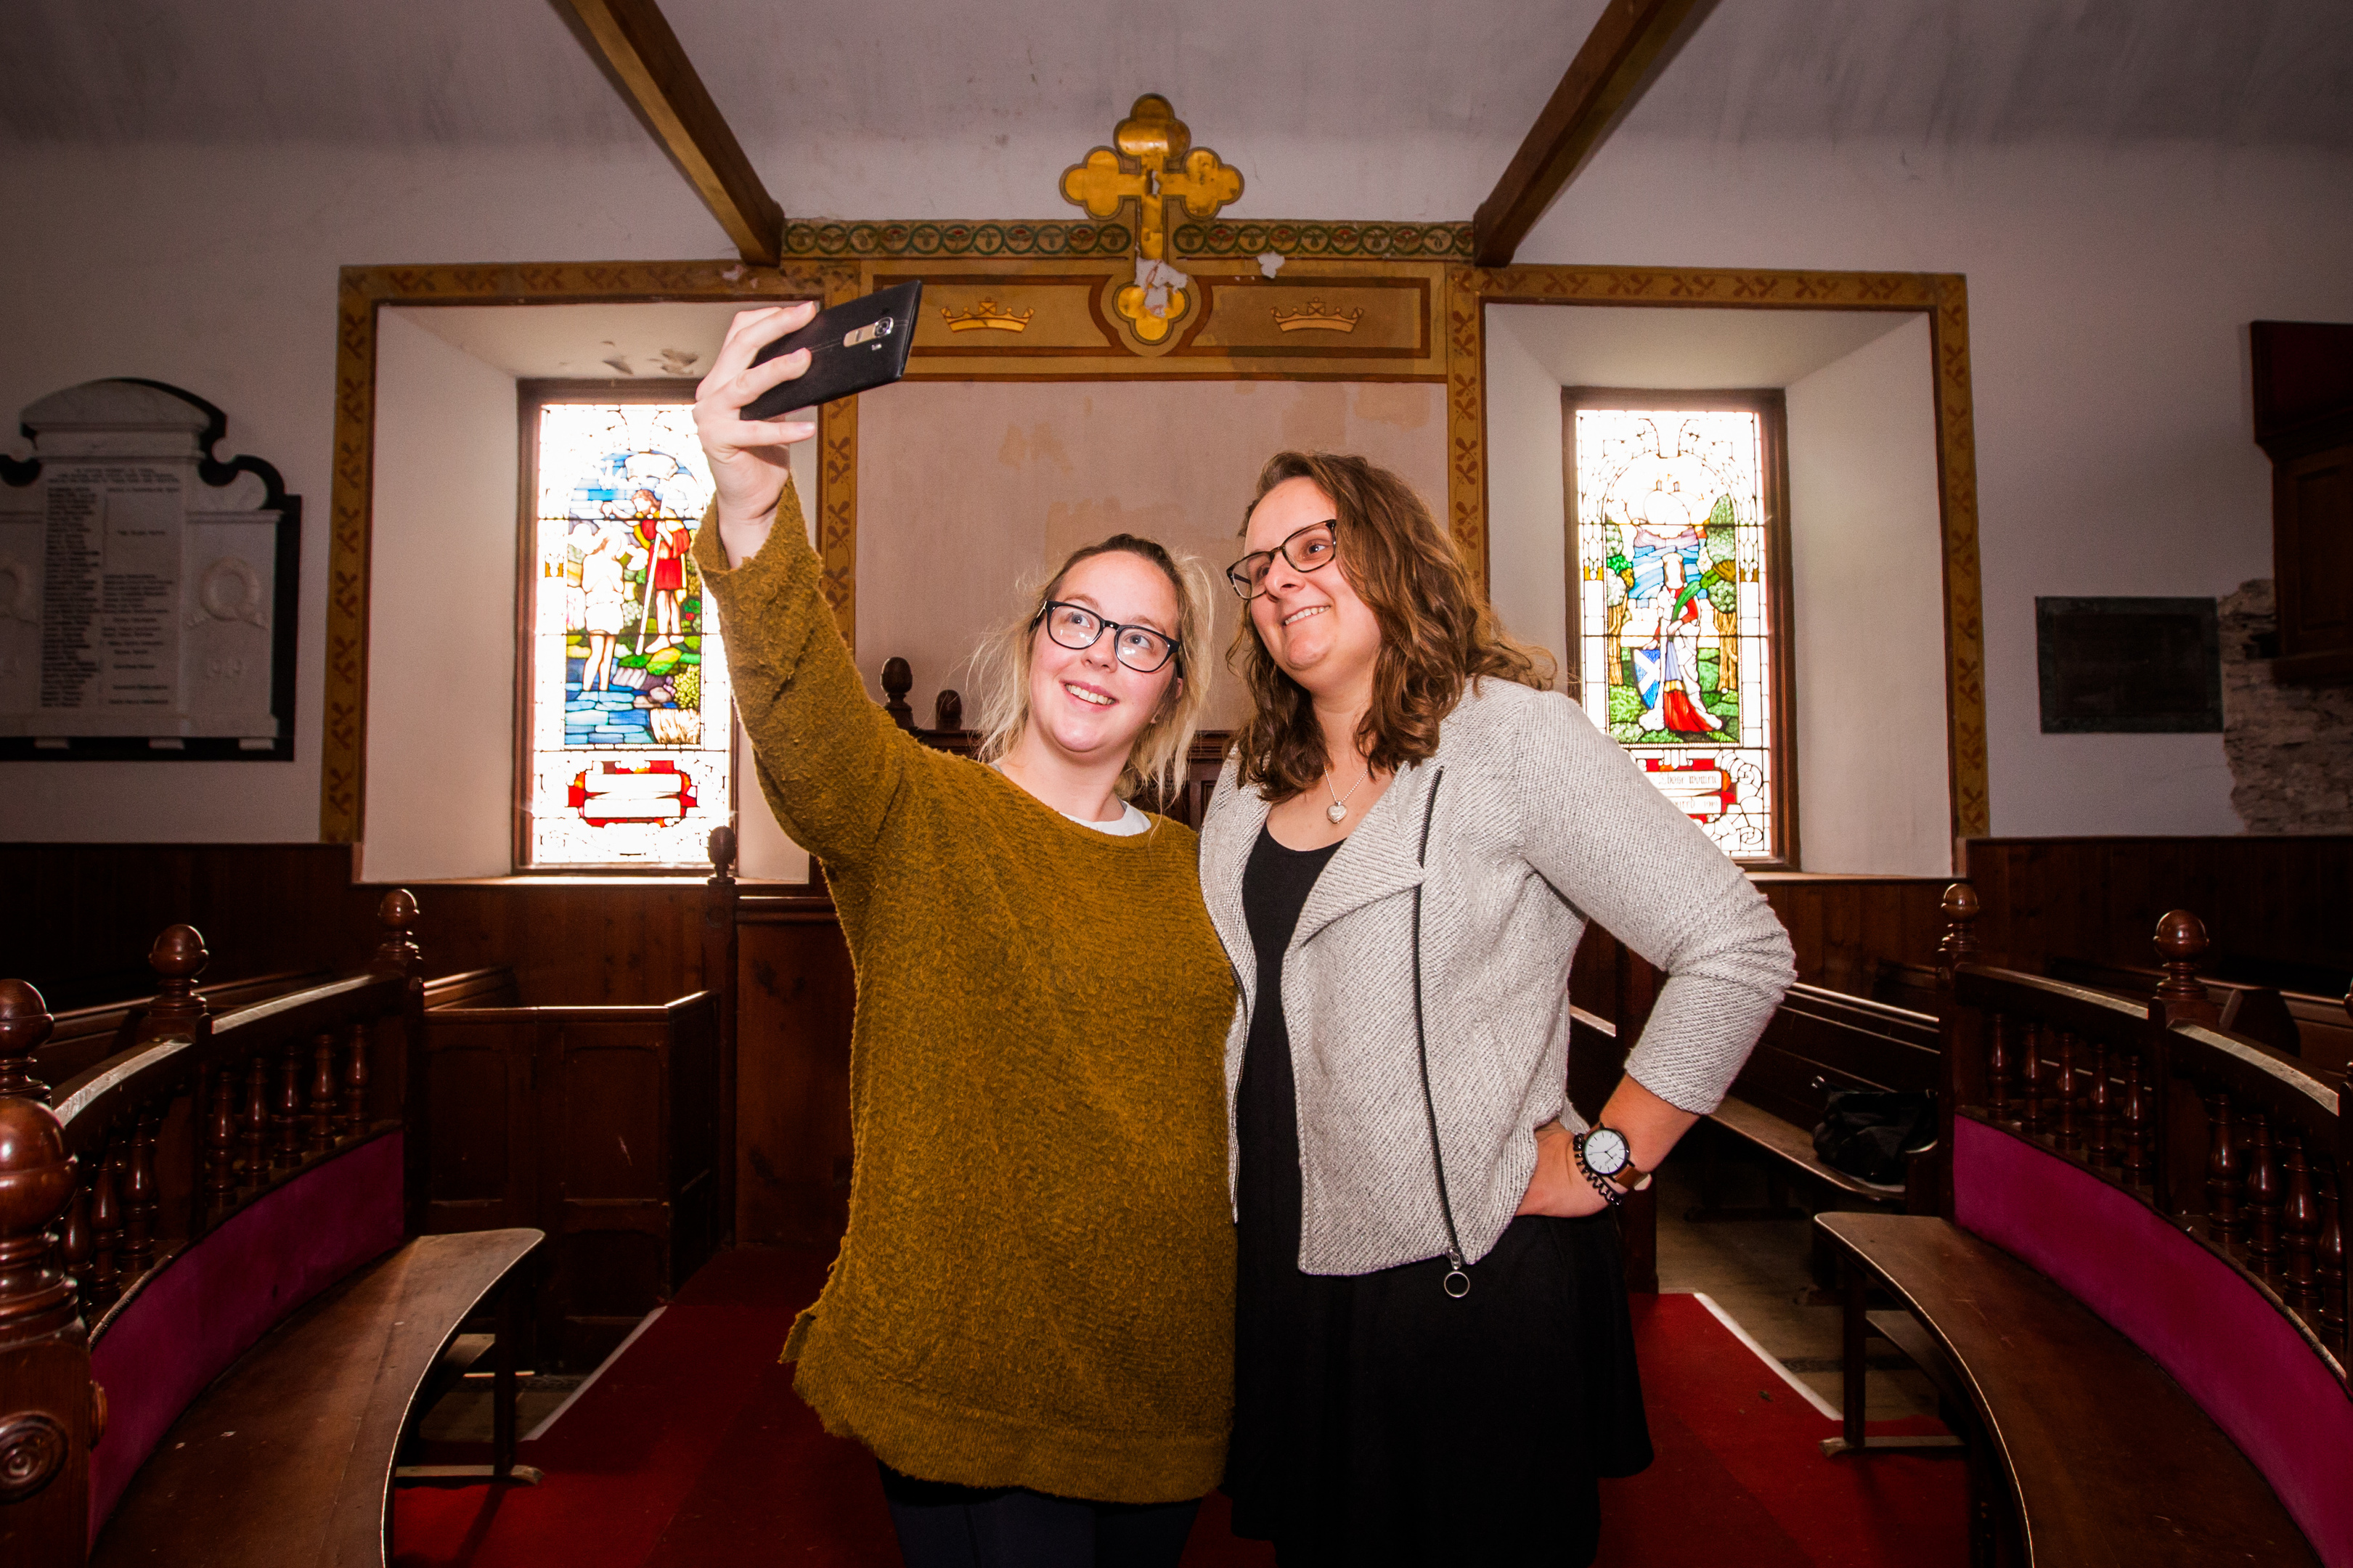 Cousins Ashely Jack (left, from Luncarty) and Taylor Clark (right, from Perth, Australia) taking a selfie at the site of one of their favourite TV shows. Outlander was filmed in Tibbermore Church,